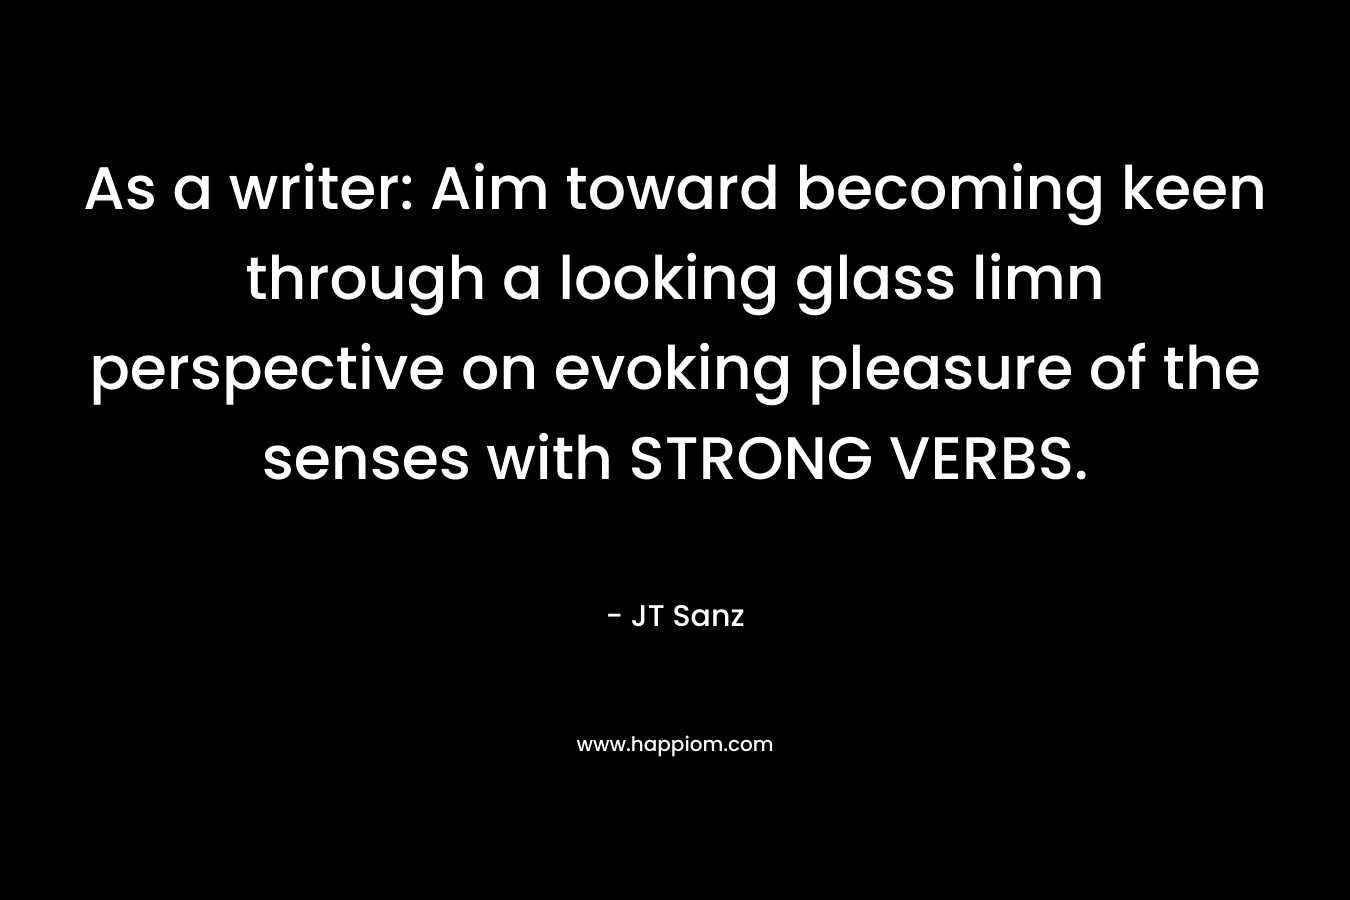 As a writer: Aim toward becoming keen through a looking glass limn perspective on evoking pleasure of the senses with STRONG VERBS. – JT Sanz